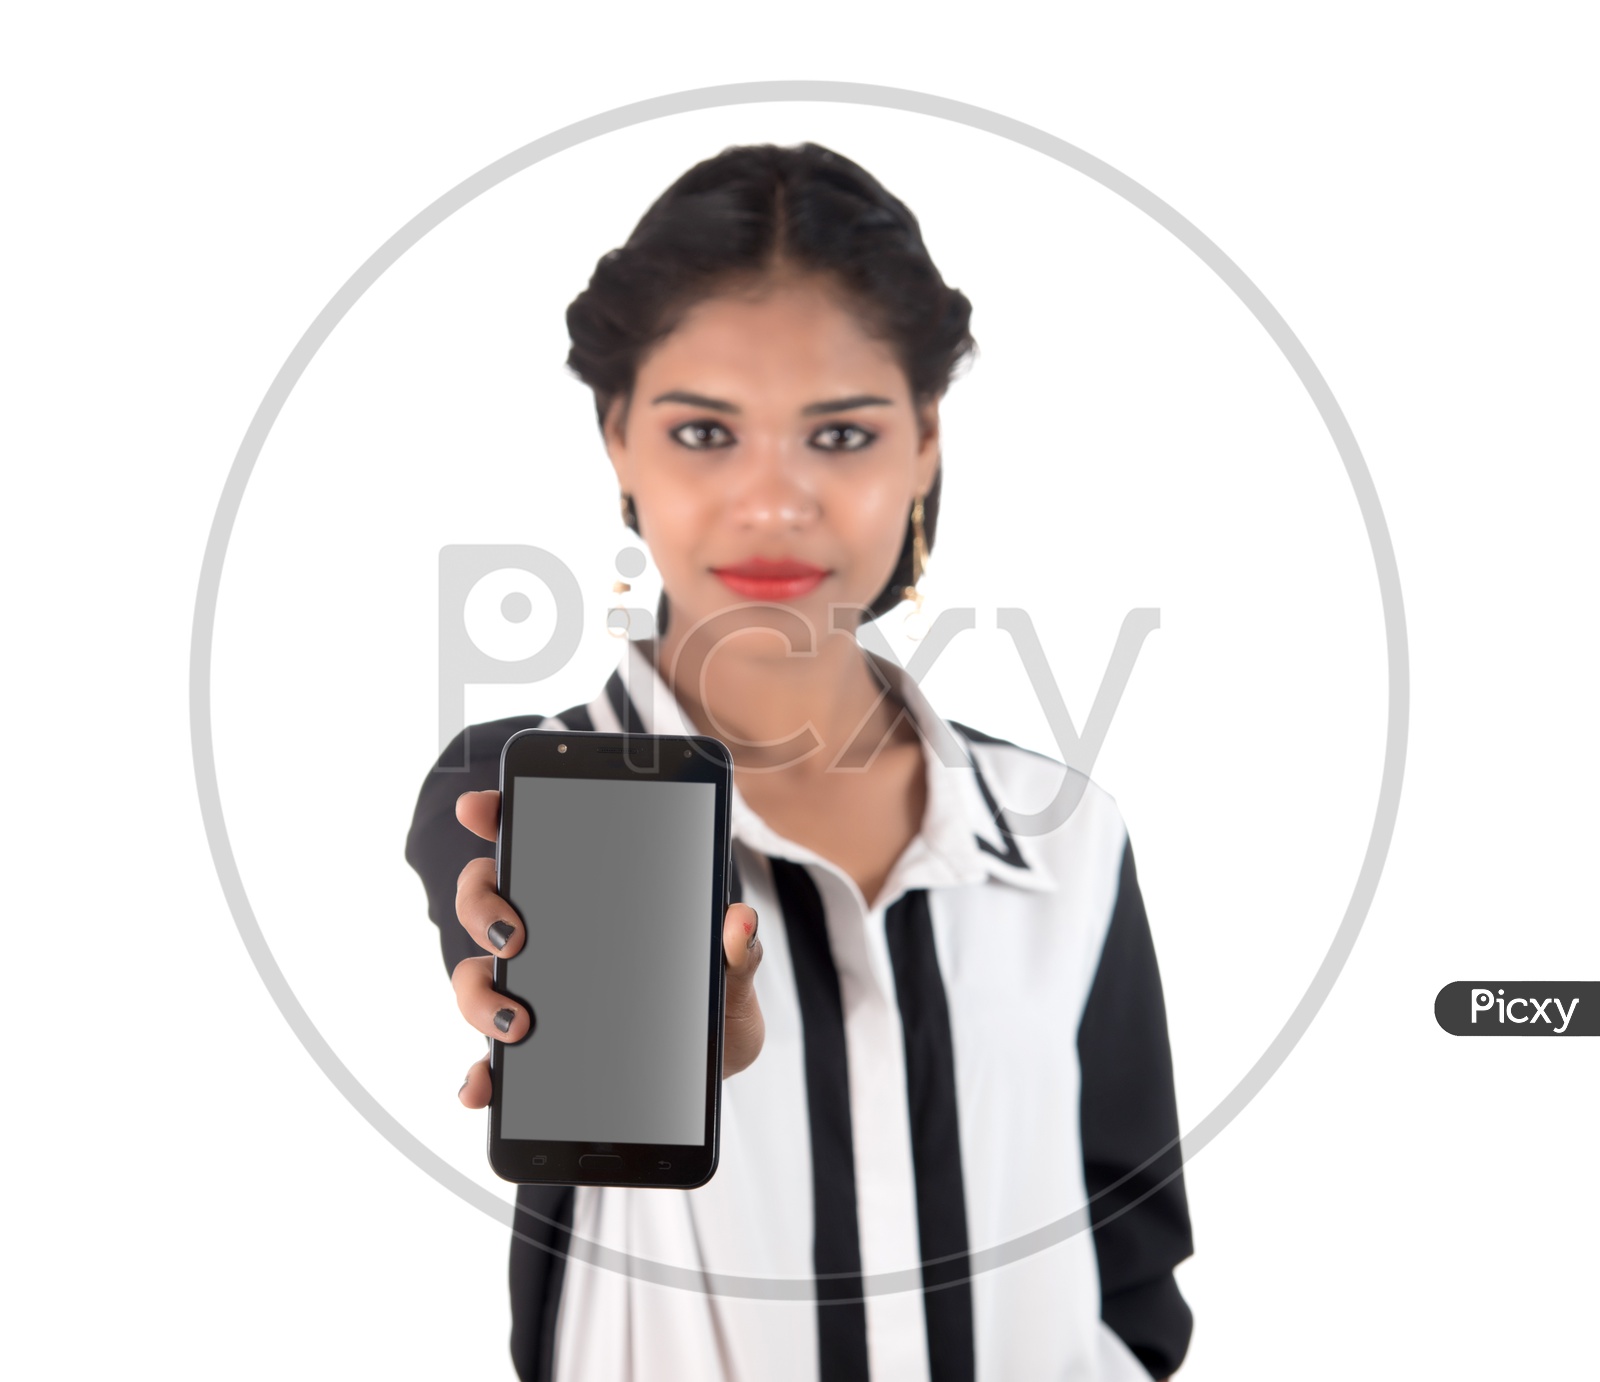 Young Indian Girl  Showing The Blank Mobile Screen or   Smart Phone Screen On an Isolated White Background